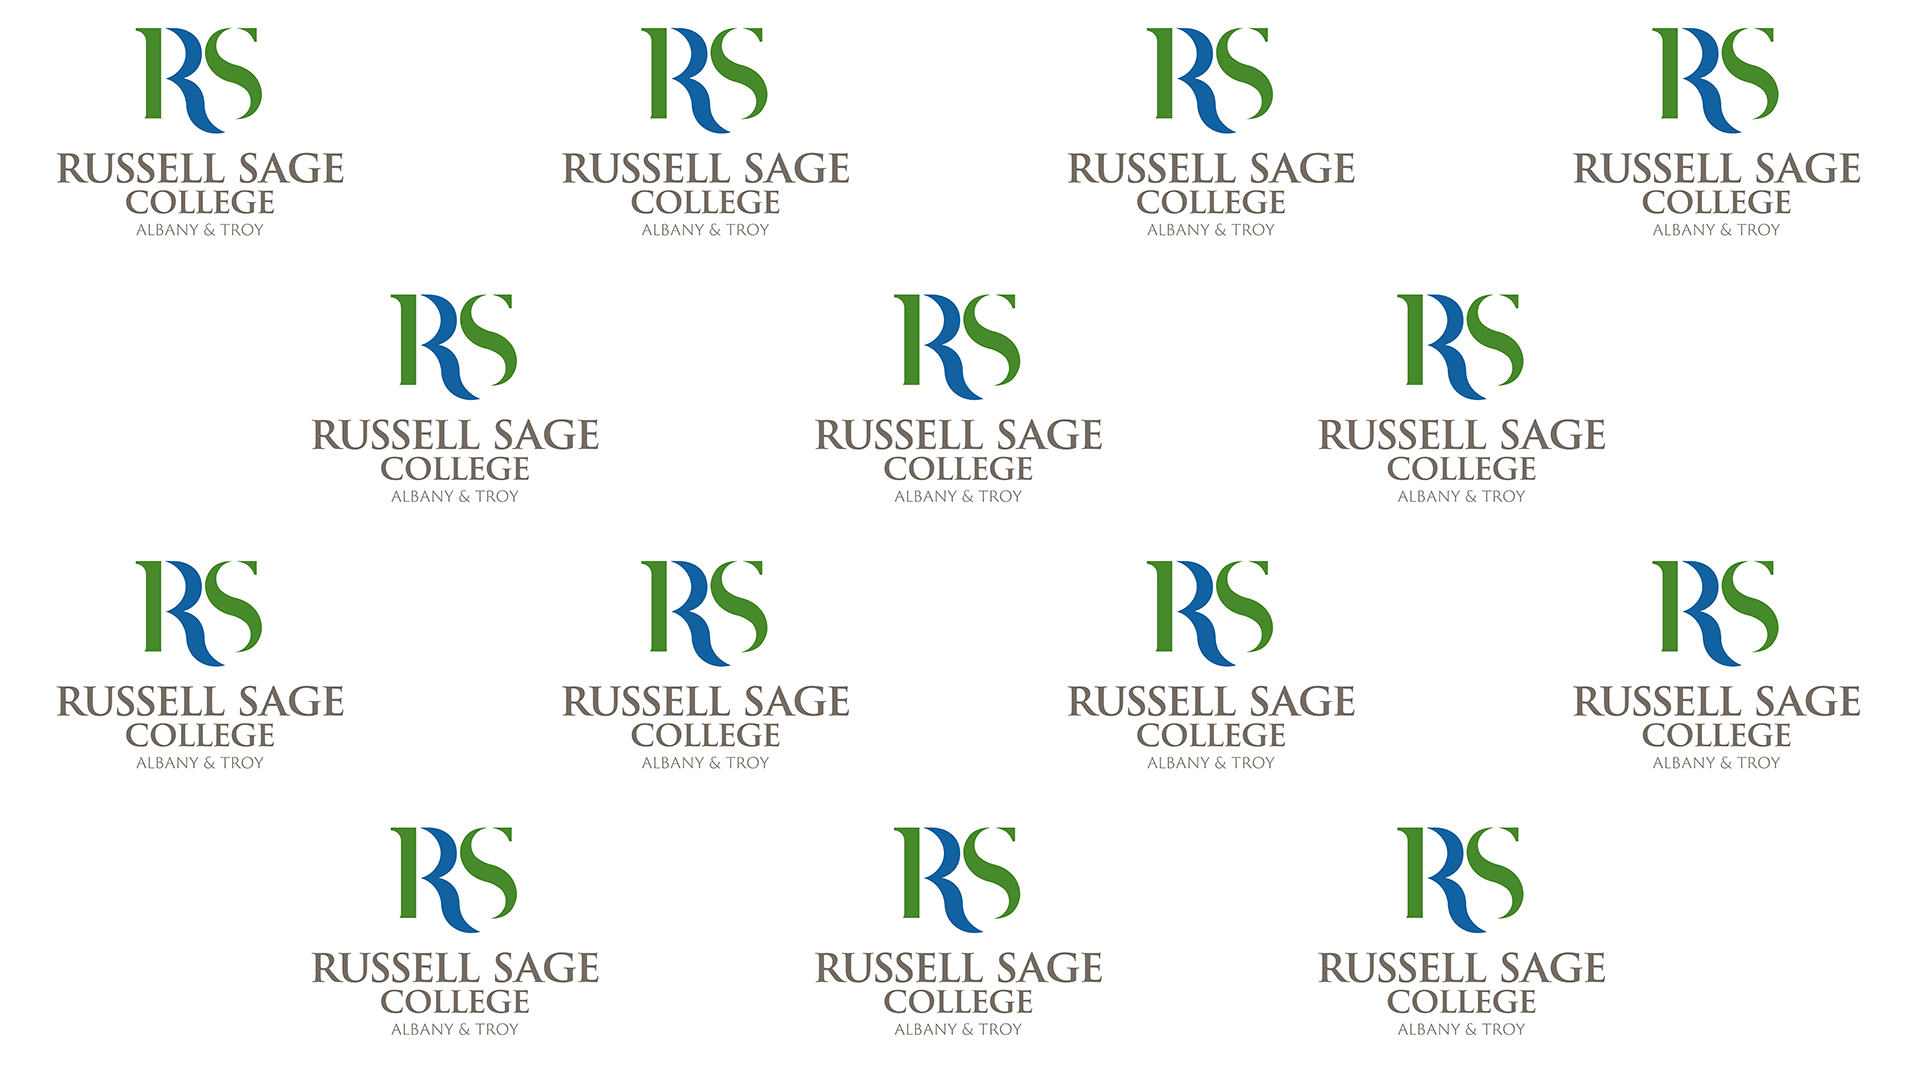 Home » Russell Sage College